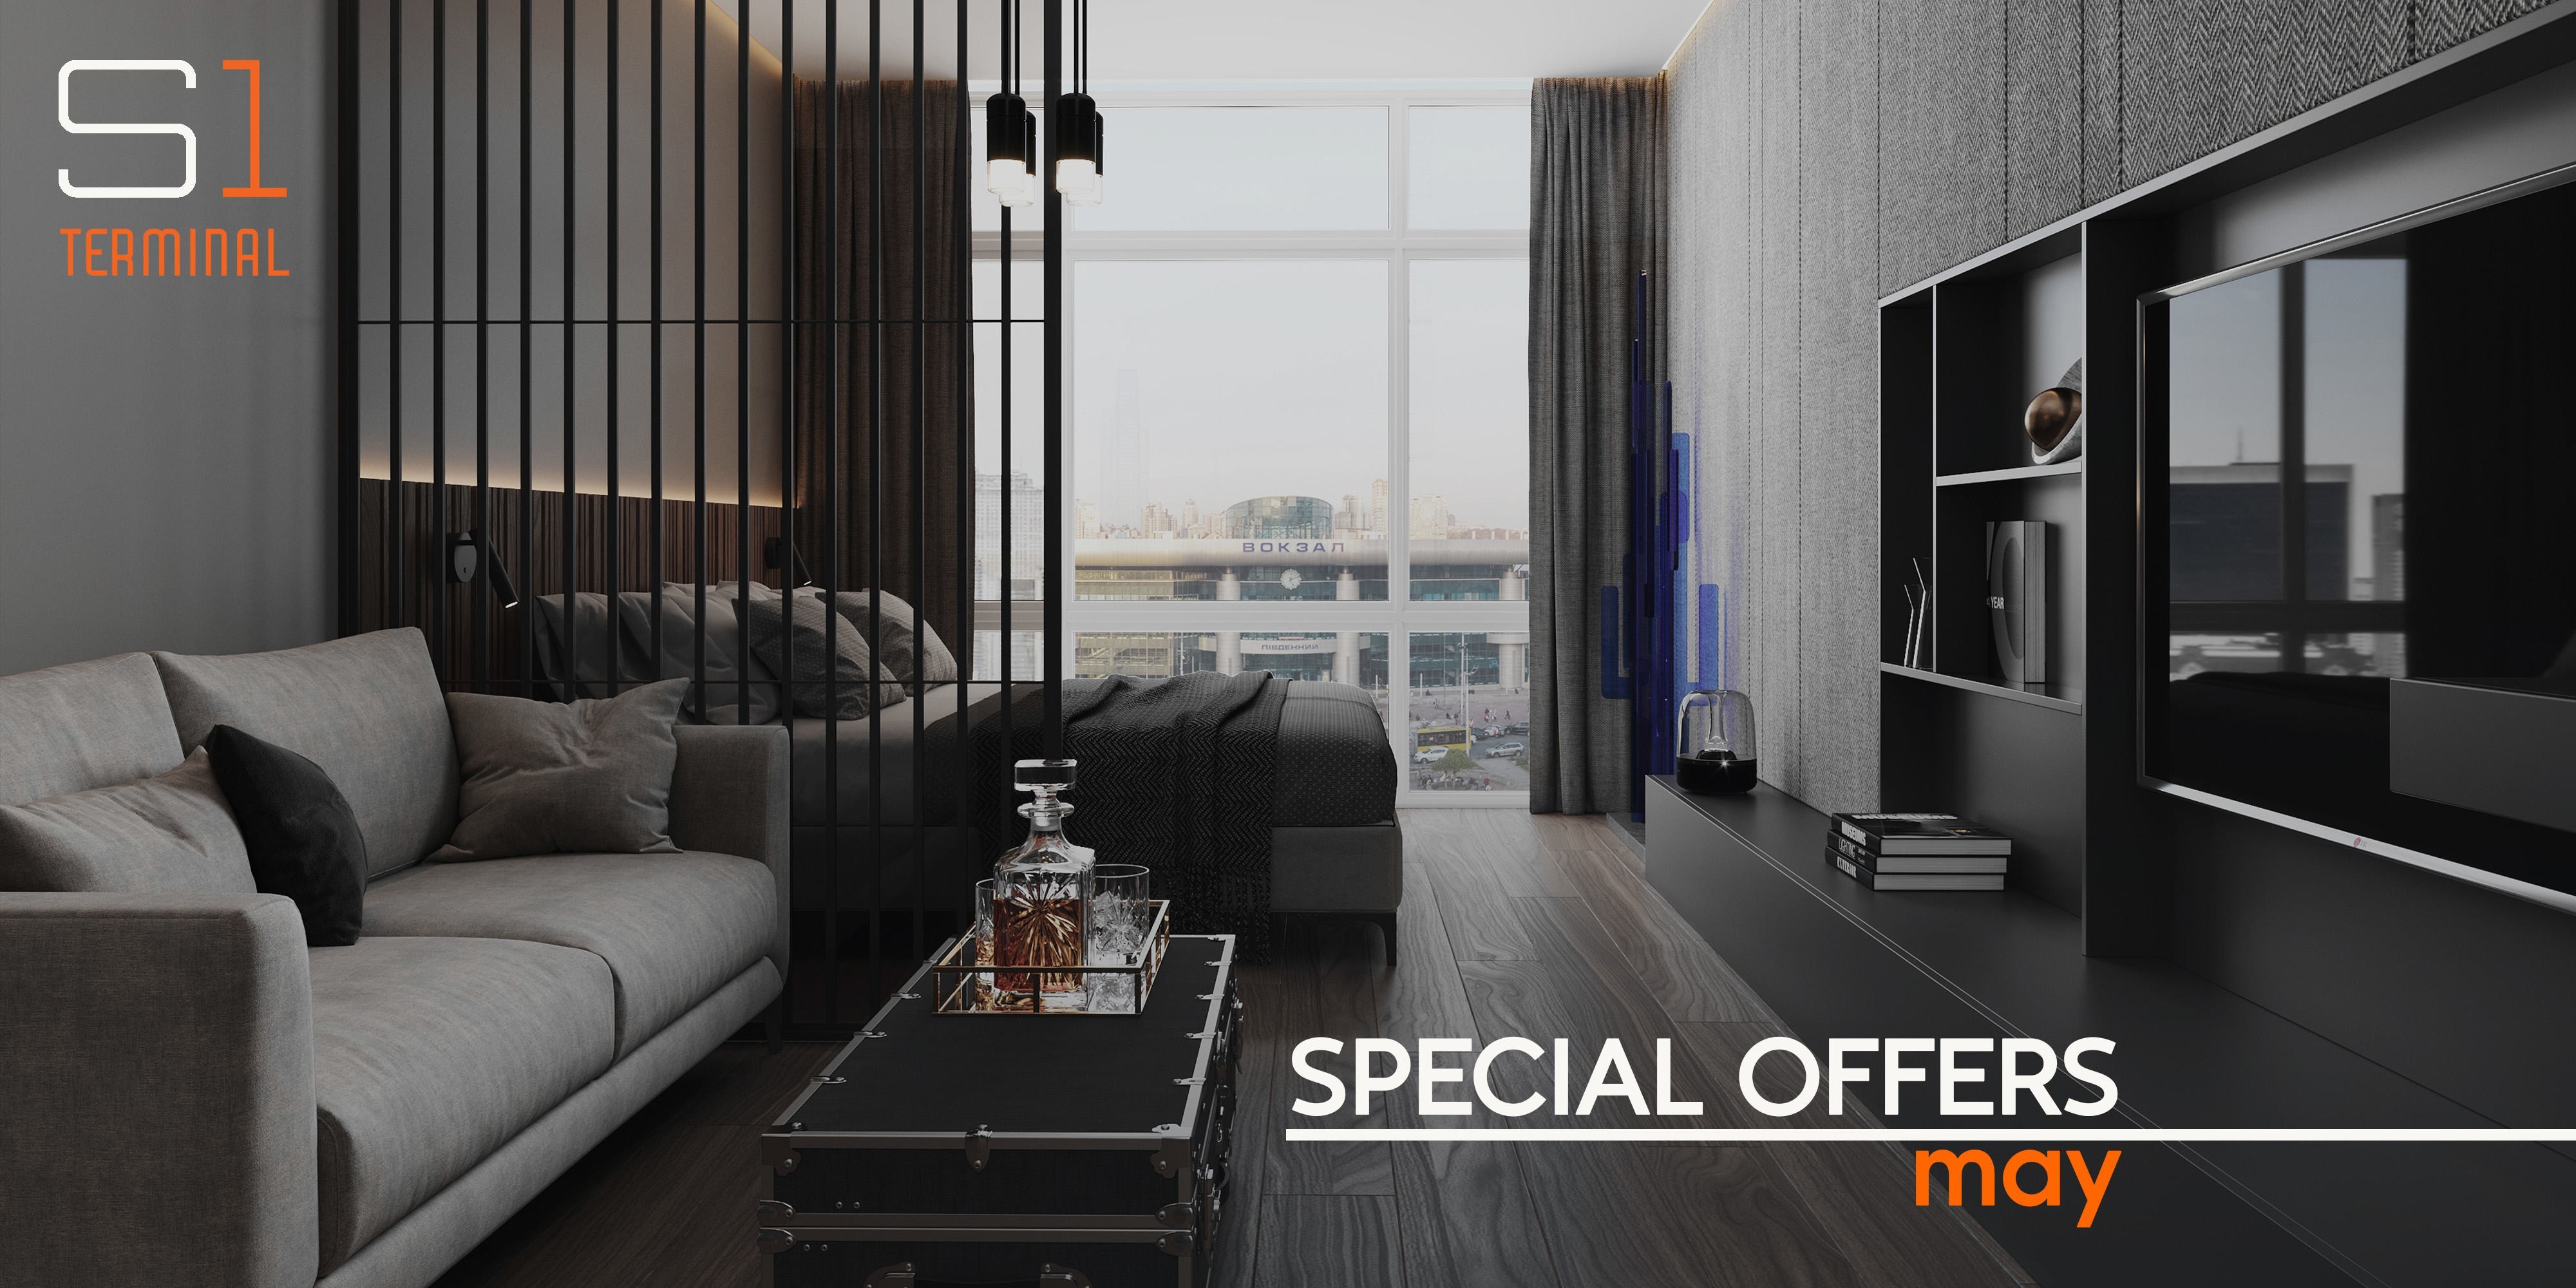 MAY: SPECIAL OFFERS FROM S1 Terminal